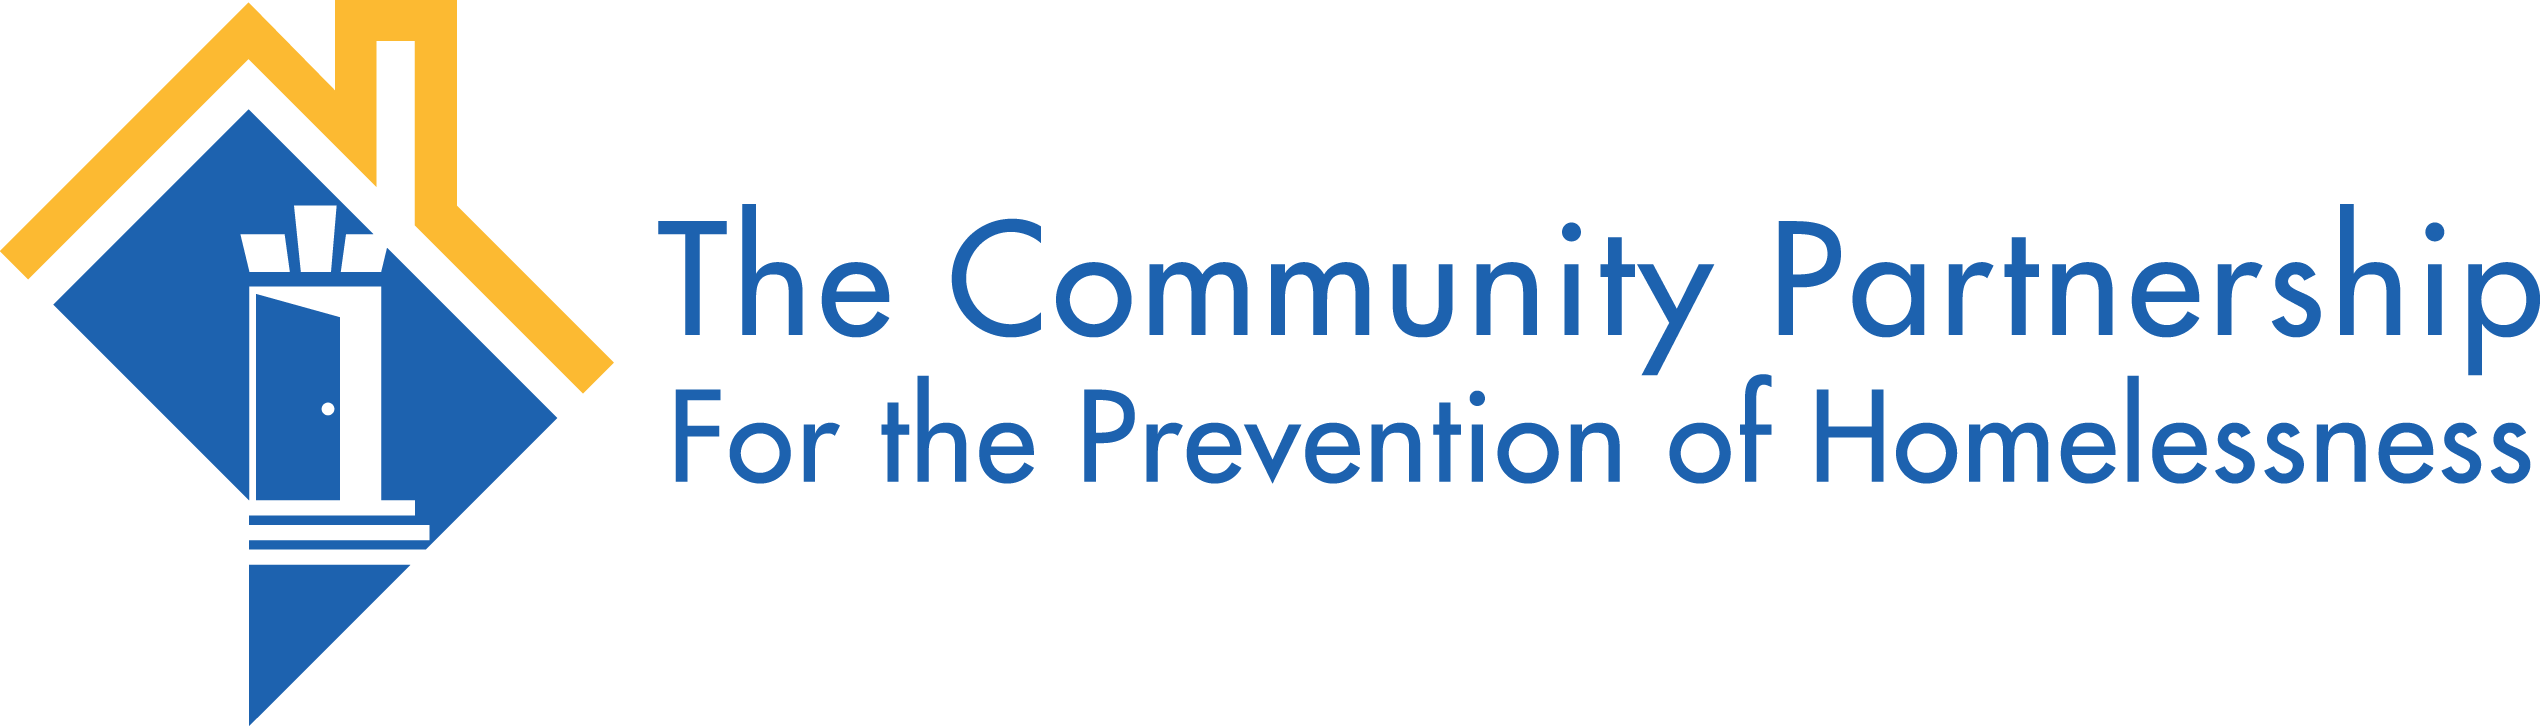 The Community Partnership for the Prevention of Homelessness